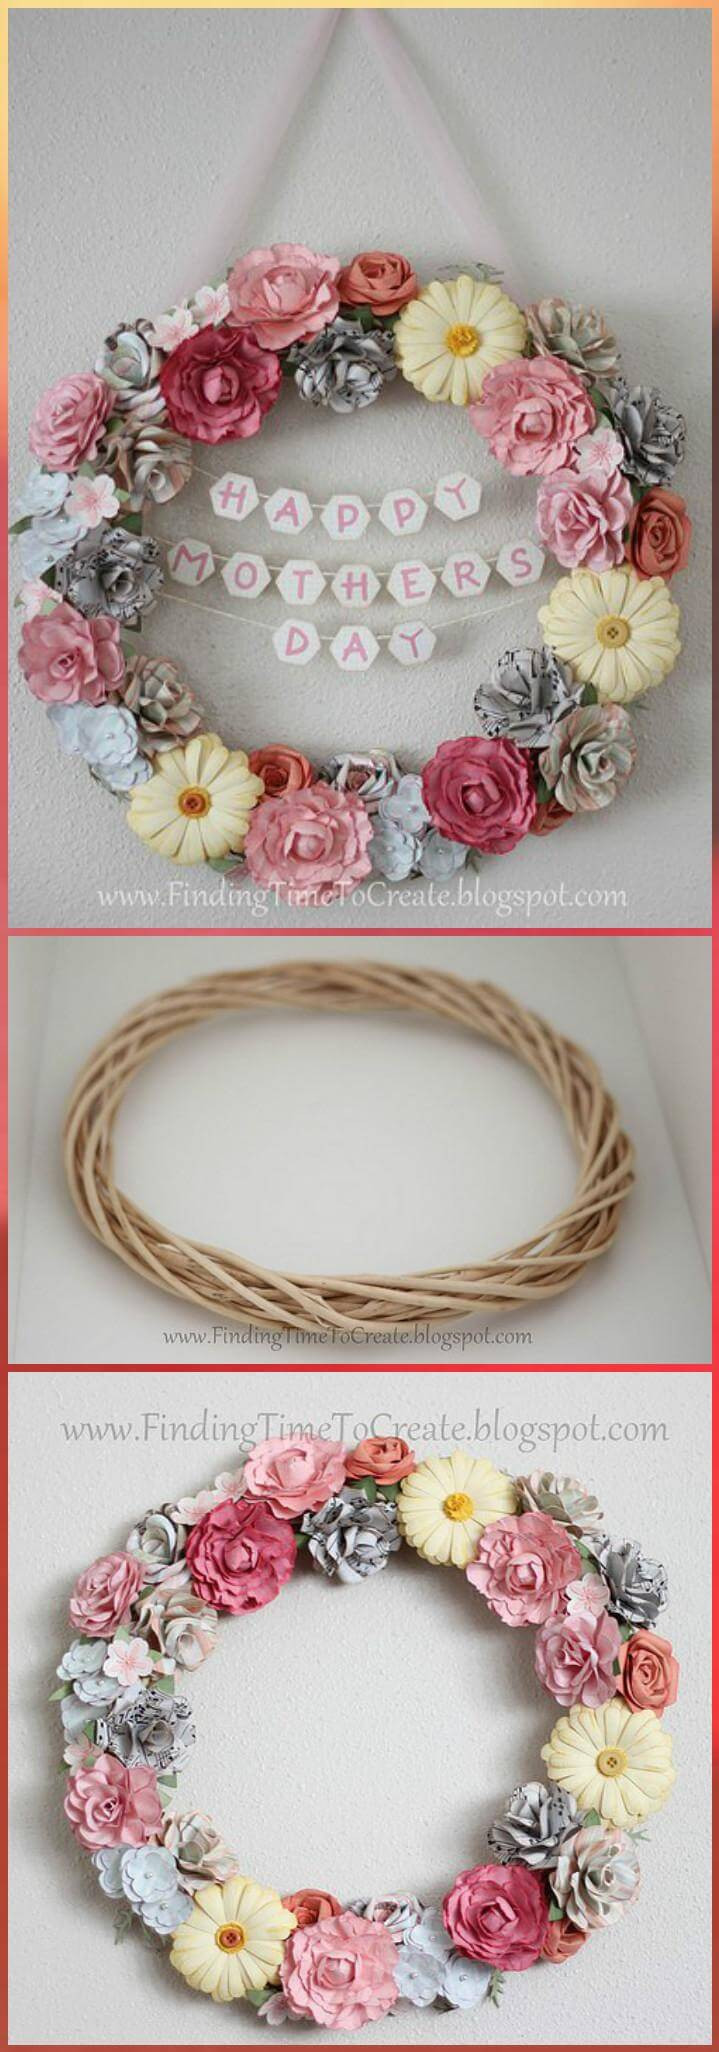 Mother Day Gift Ideas Handmade
 300 DIY Mothers Day Gifts You Can Make For Your Mom DIY